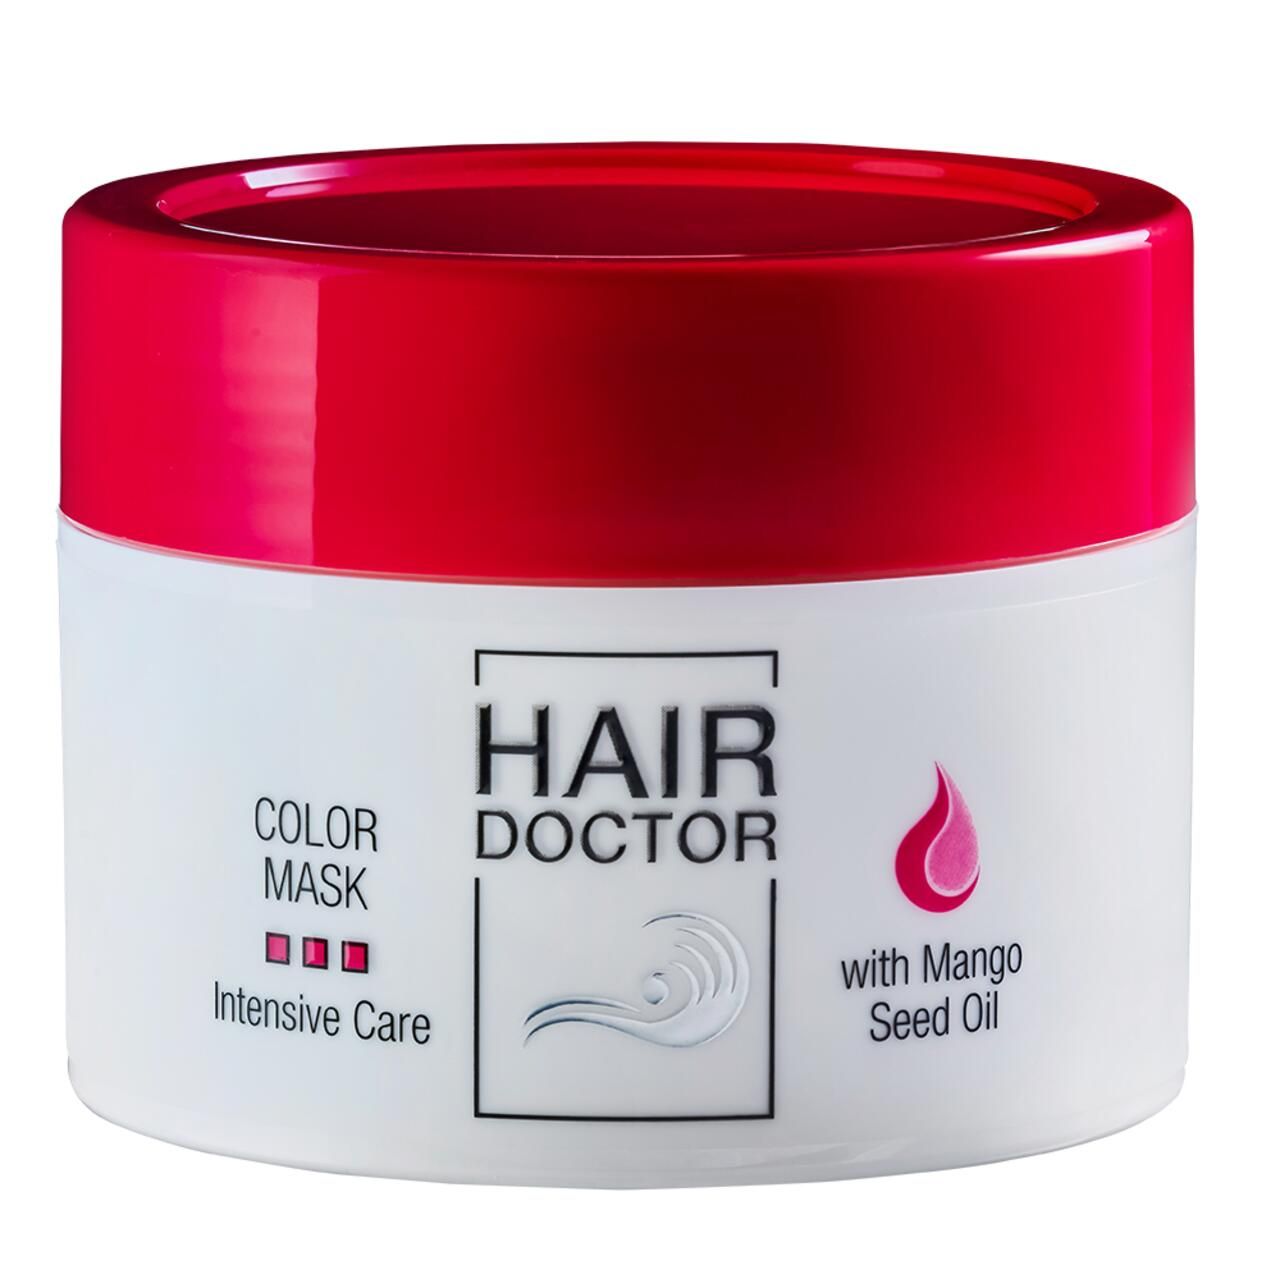 Hair Doctor, Color Mask Intense